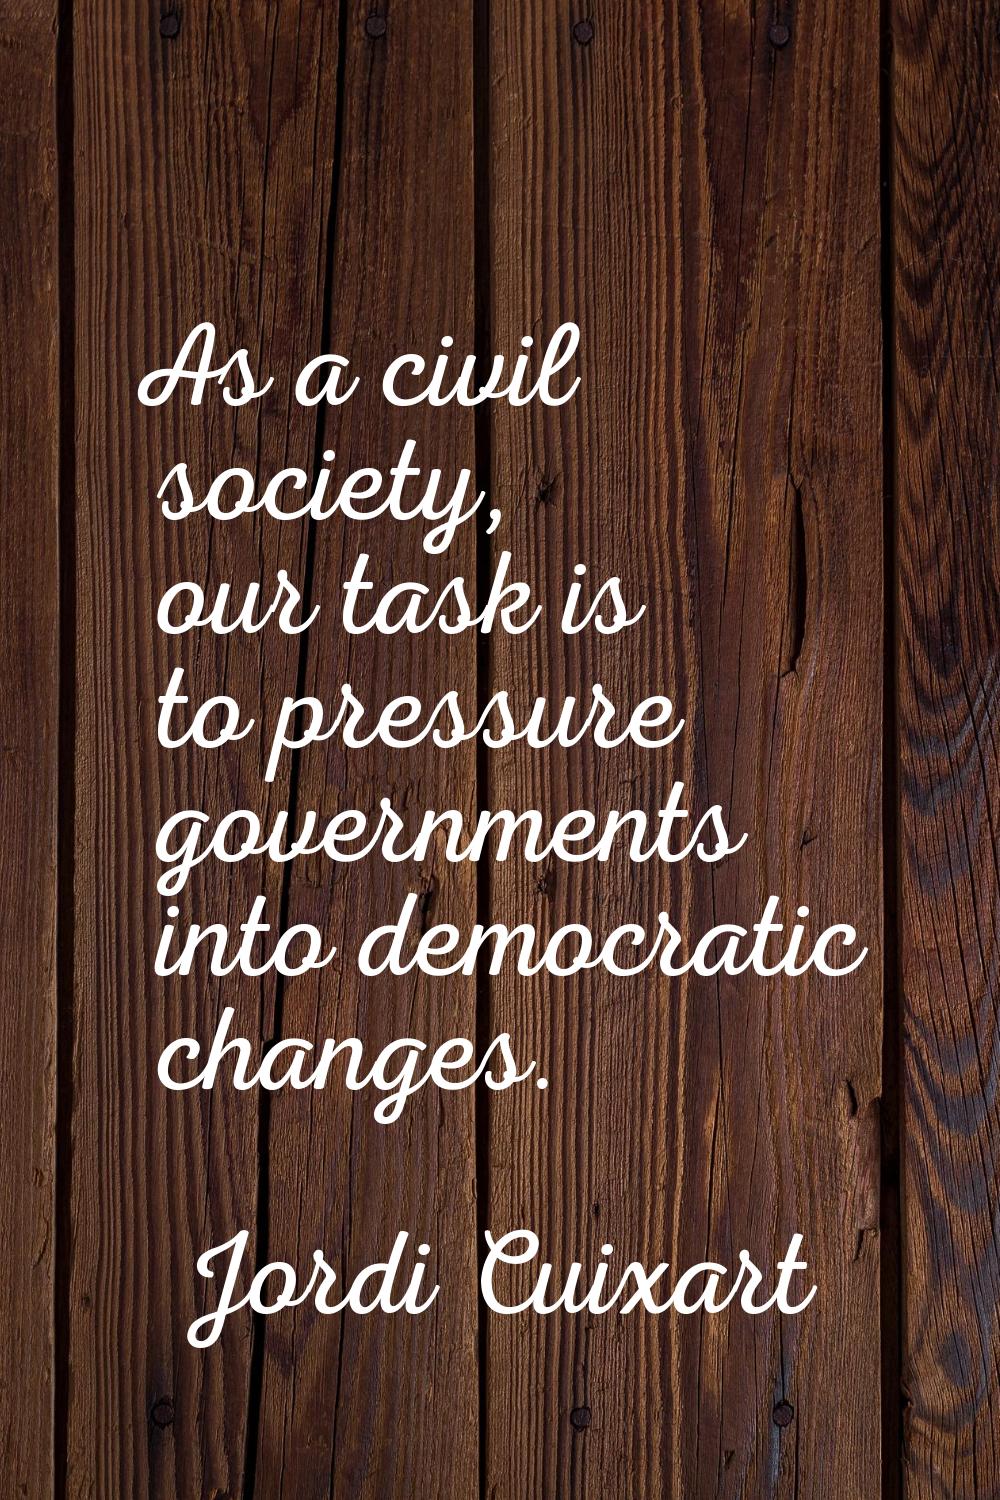 As a civil society, our task is to pressure governments into democratic changes.